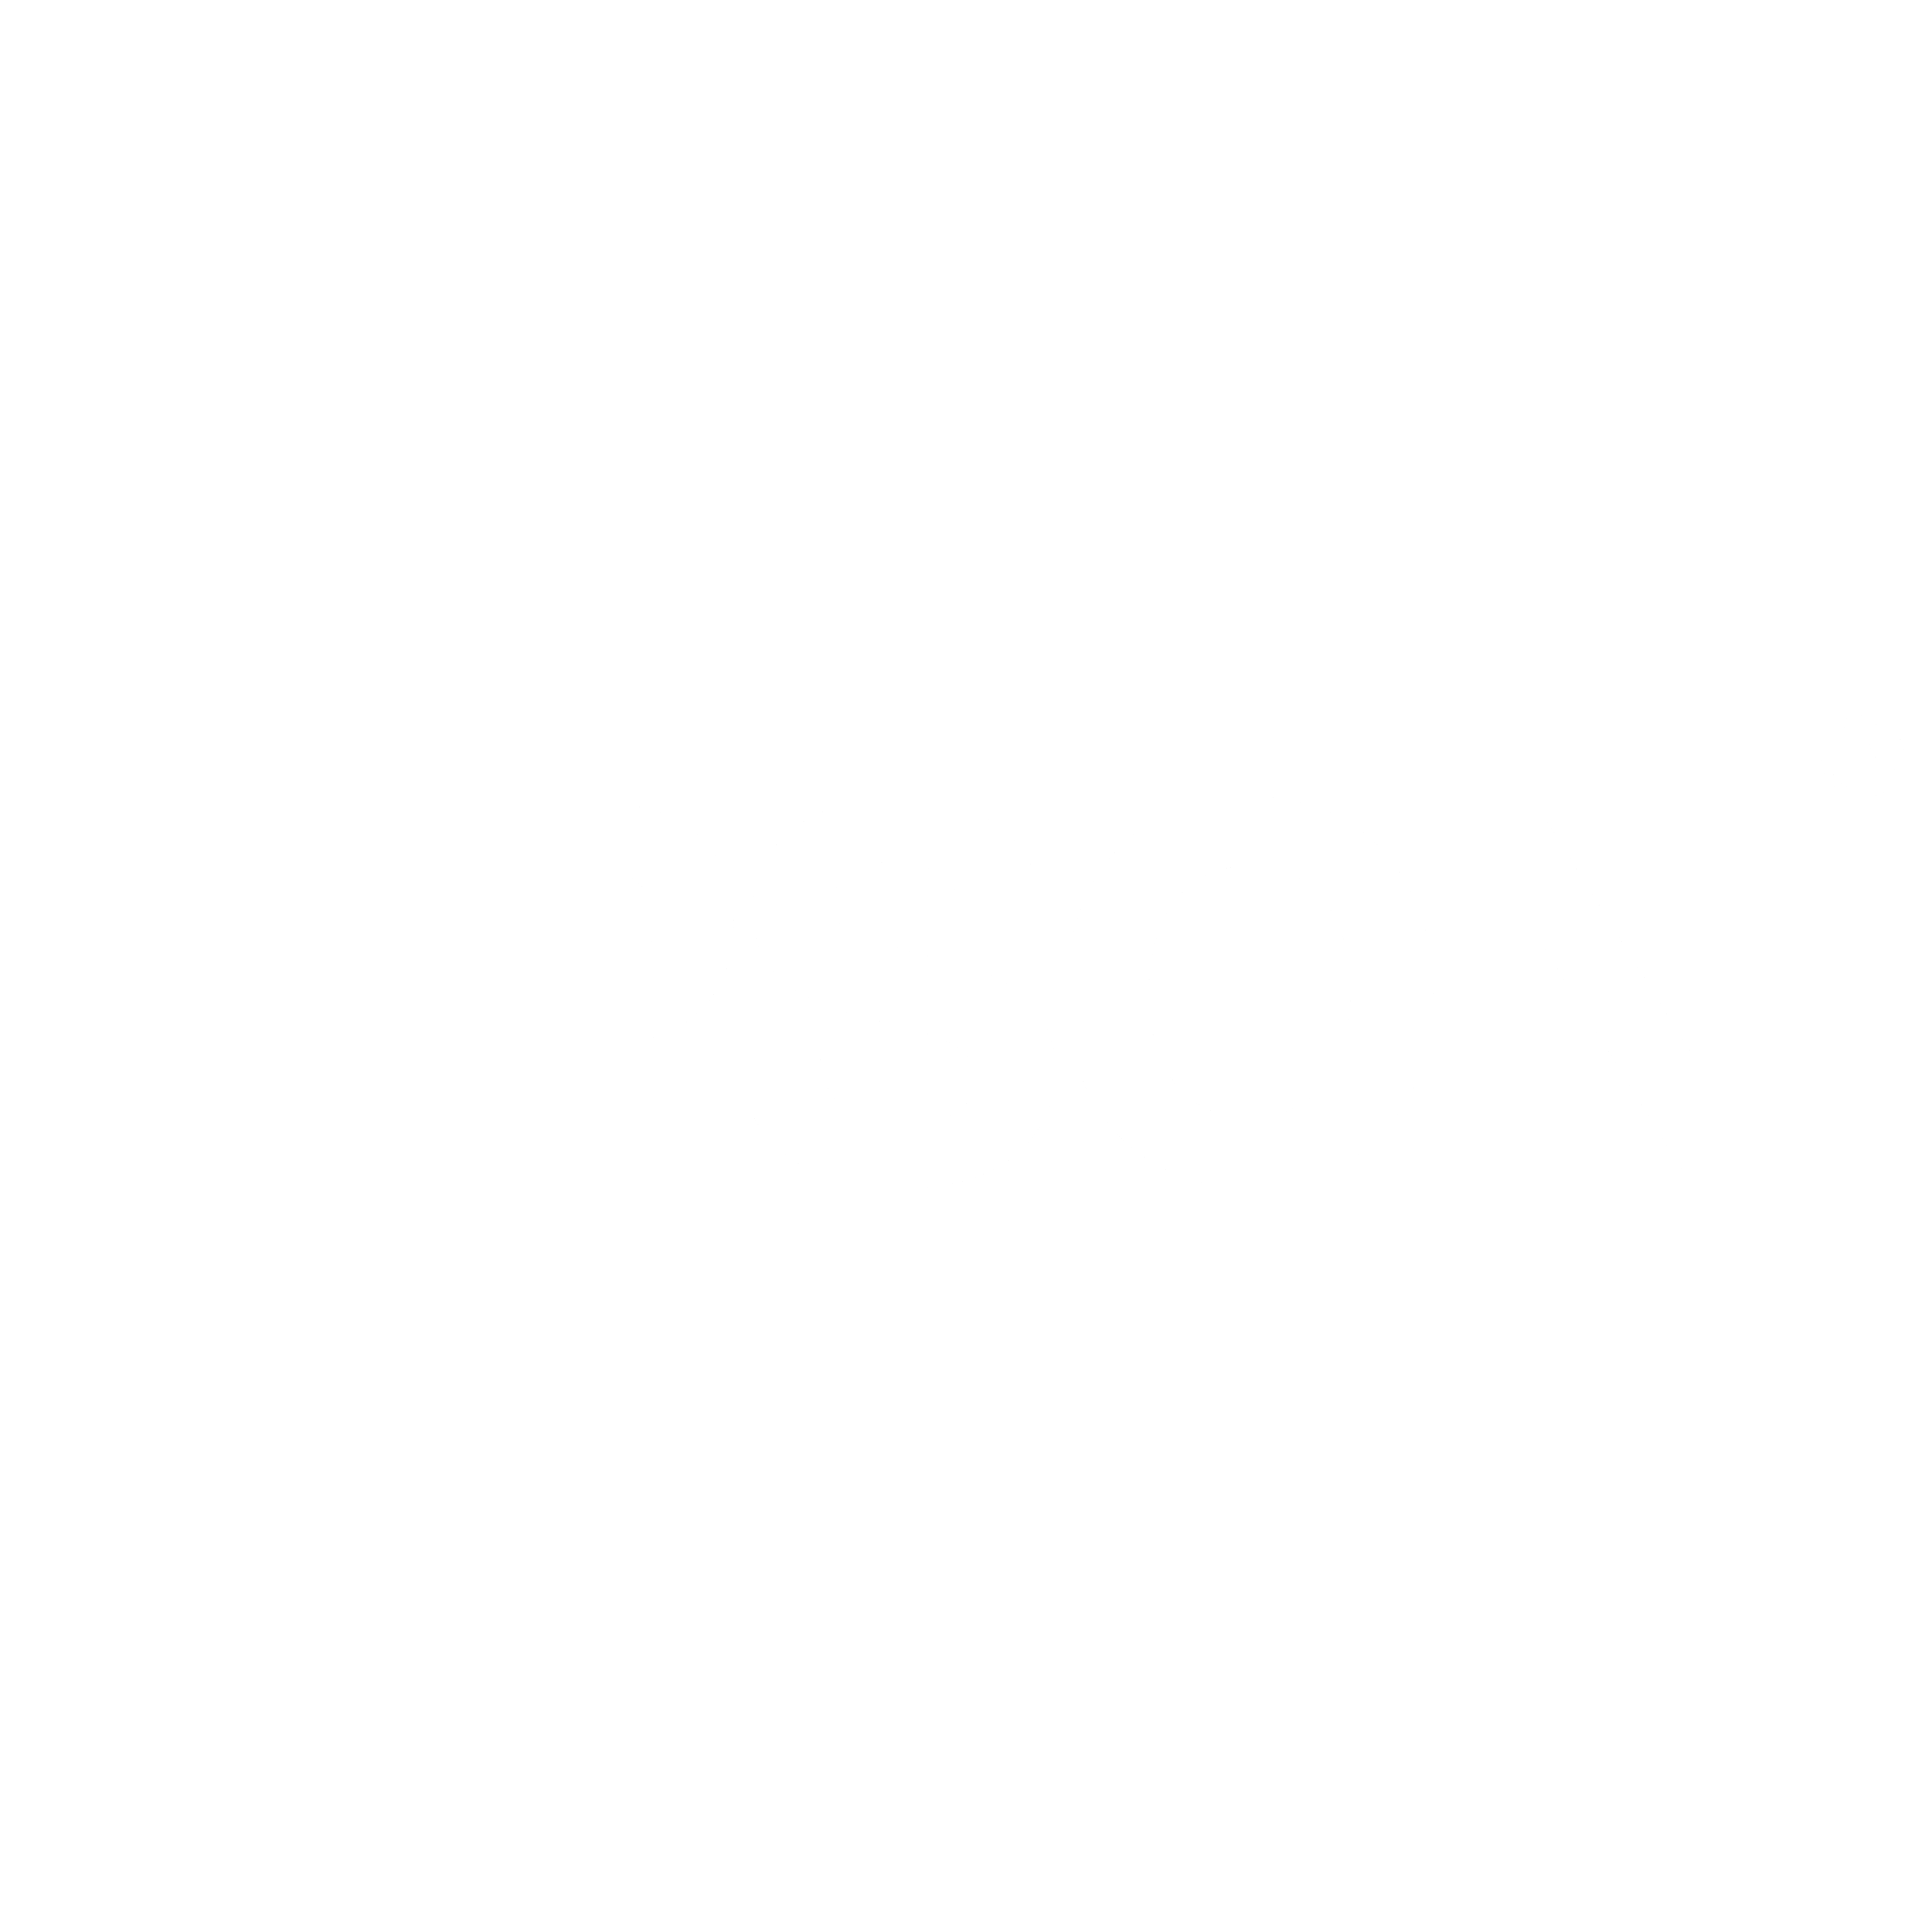 Download Epson Logo Black And